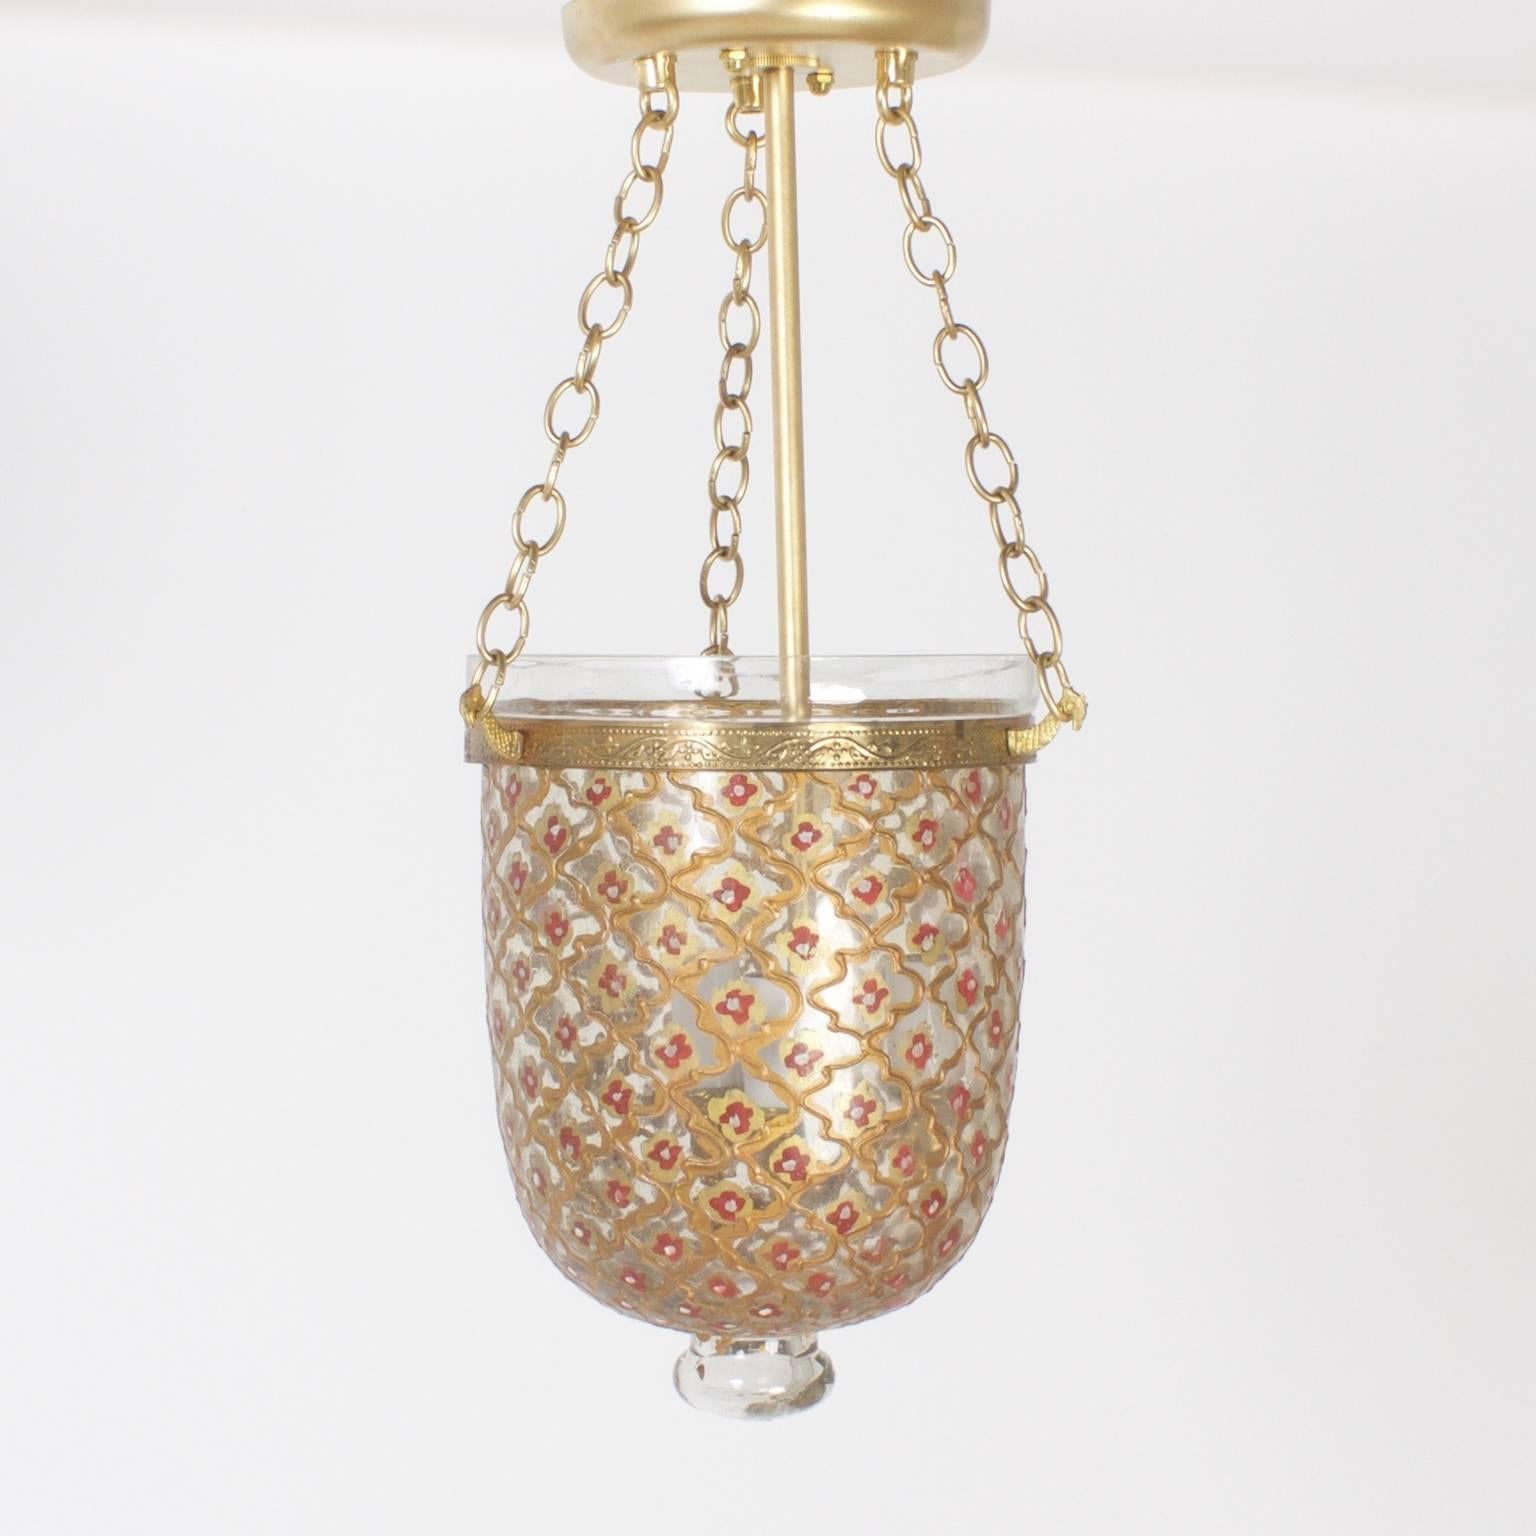 Intriguing pair of handblown bell jar lanterns enameled in a Mediterranean style of repeating cartouche and flower patterns that cascades romantic light into a room.

